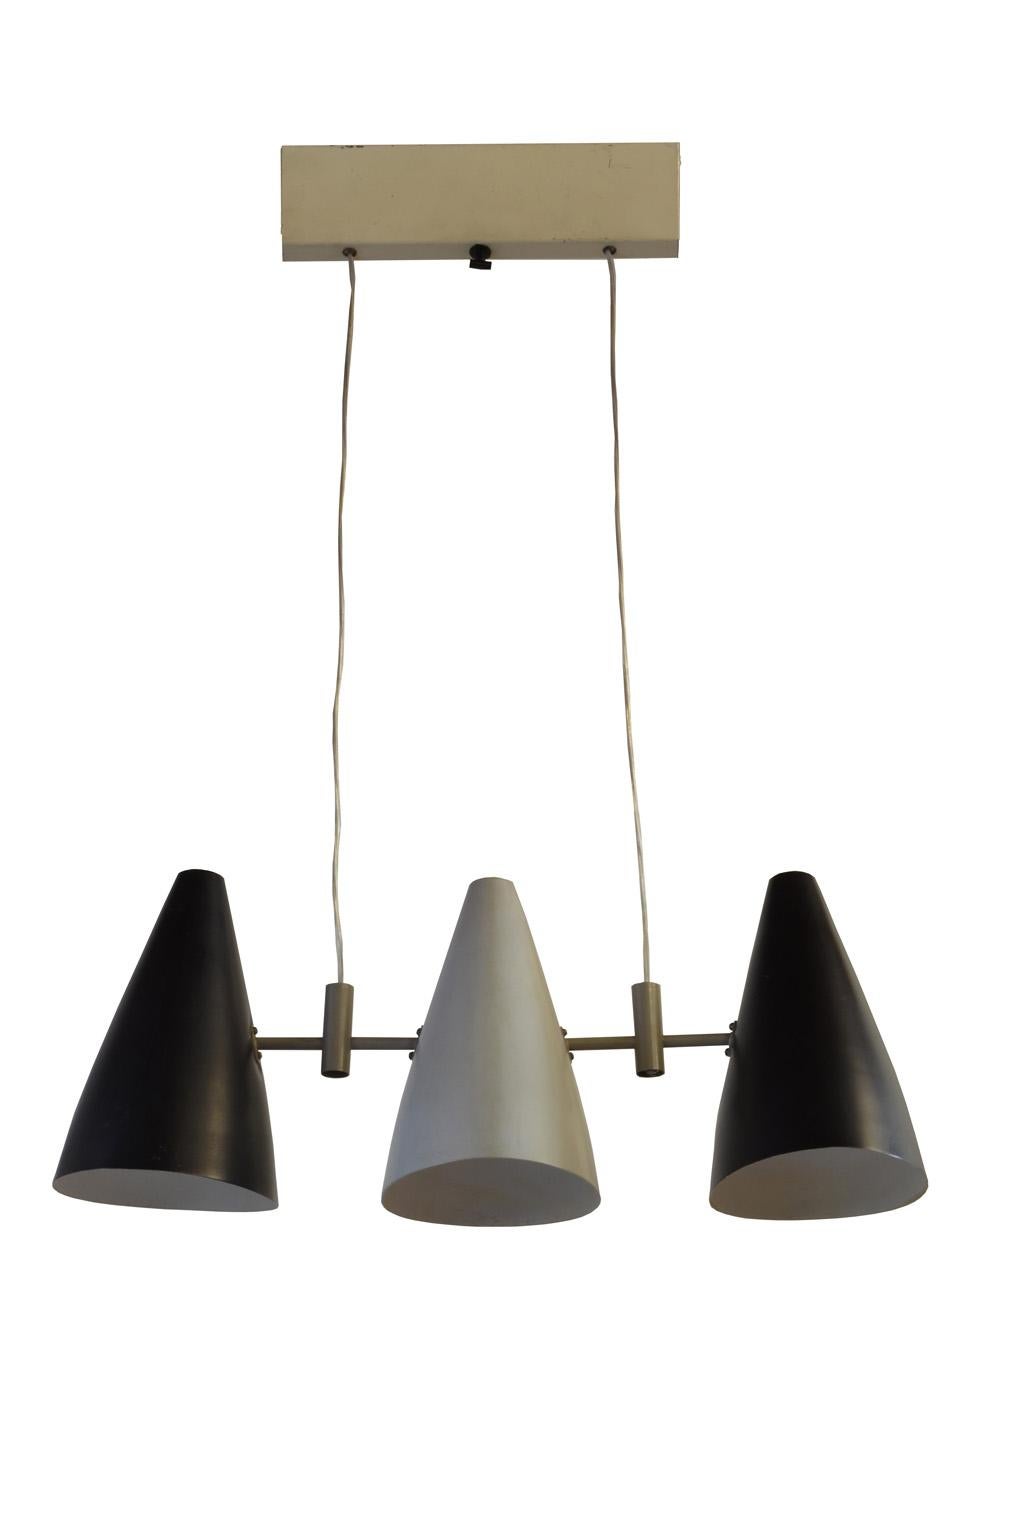 Italian Pendant Lamp with Three Lights, 1950s, Lacquered in Black and Gray (Italienisch) im Angebot